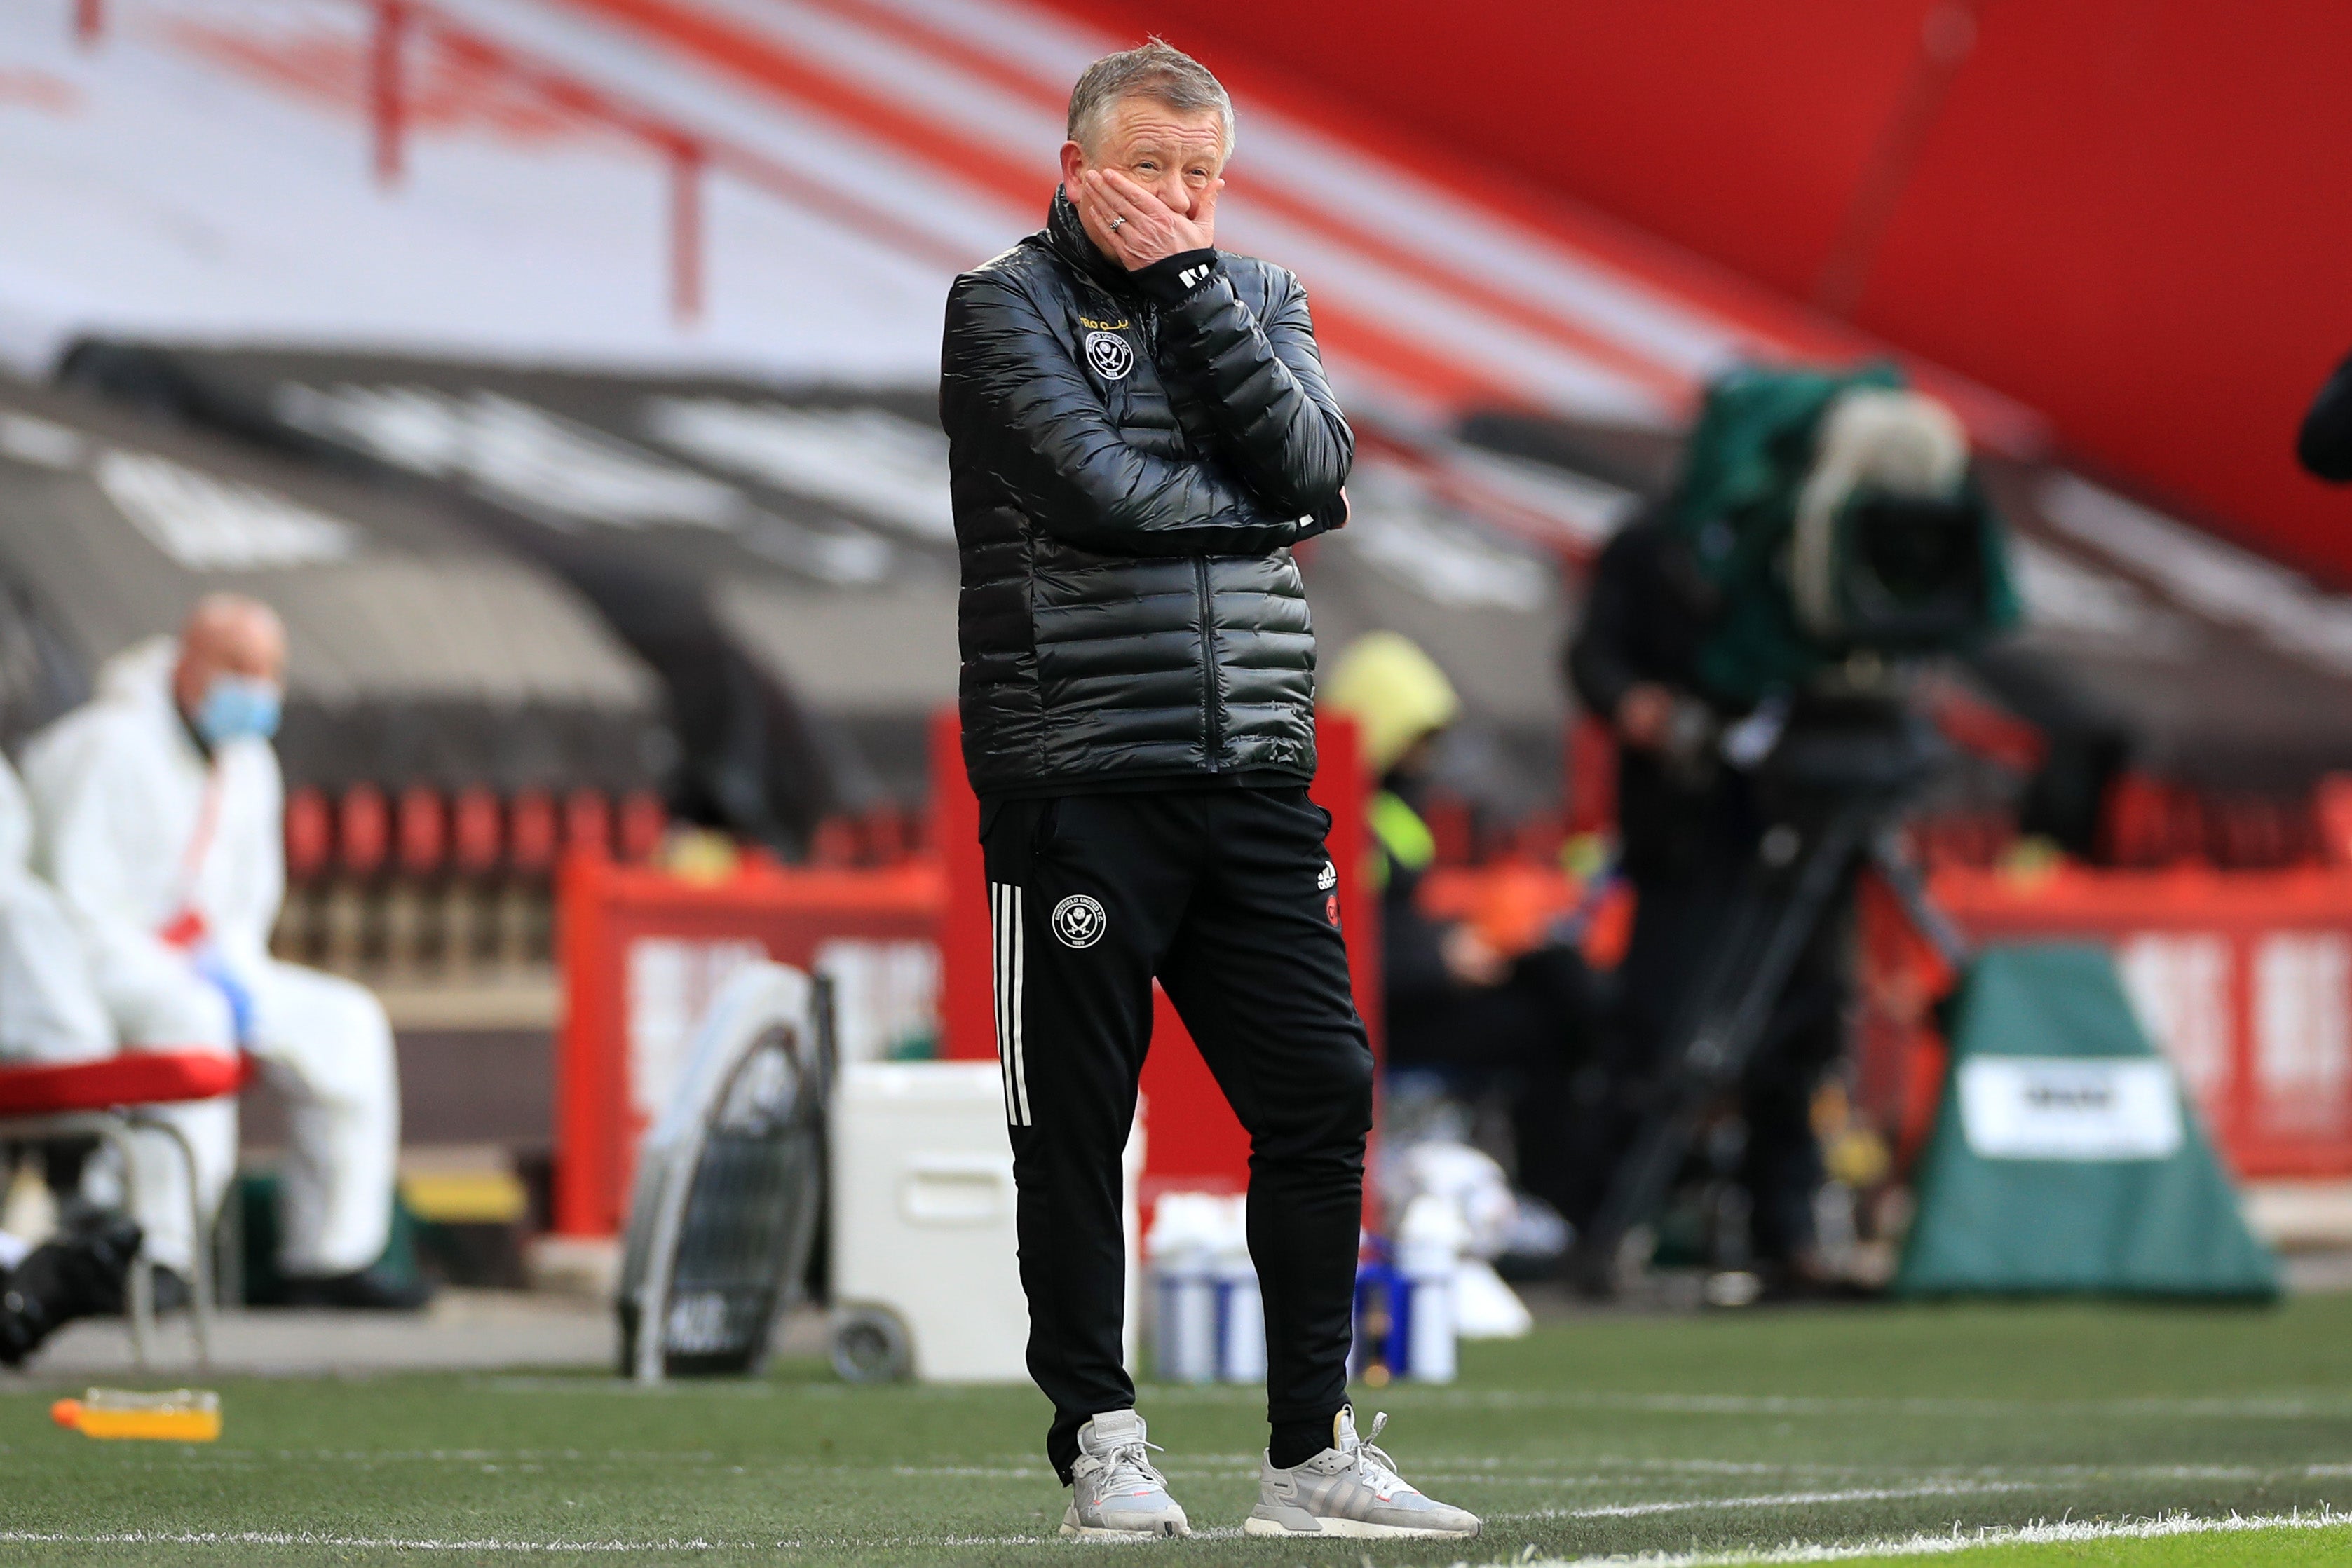 Chris Wilder left Sheffield United earlier this month